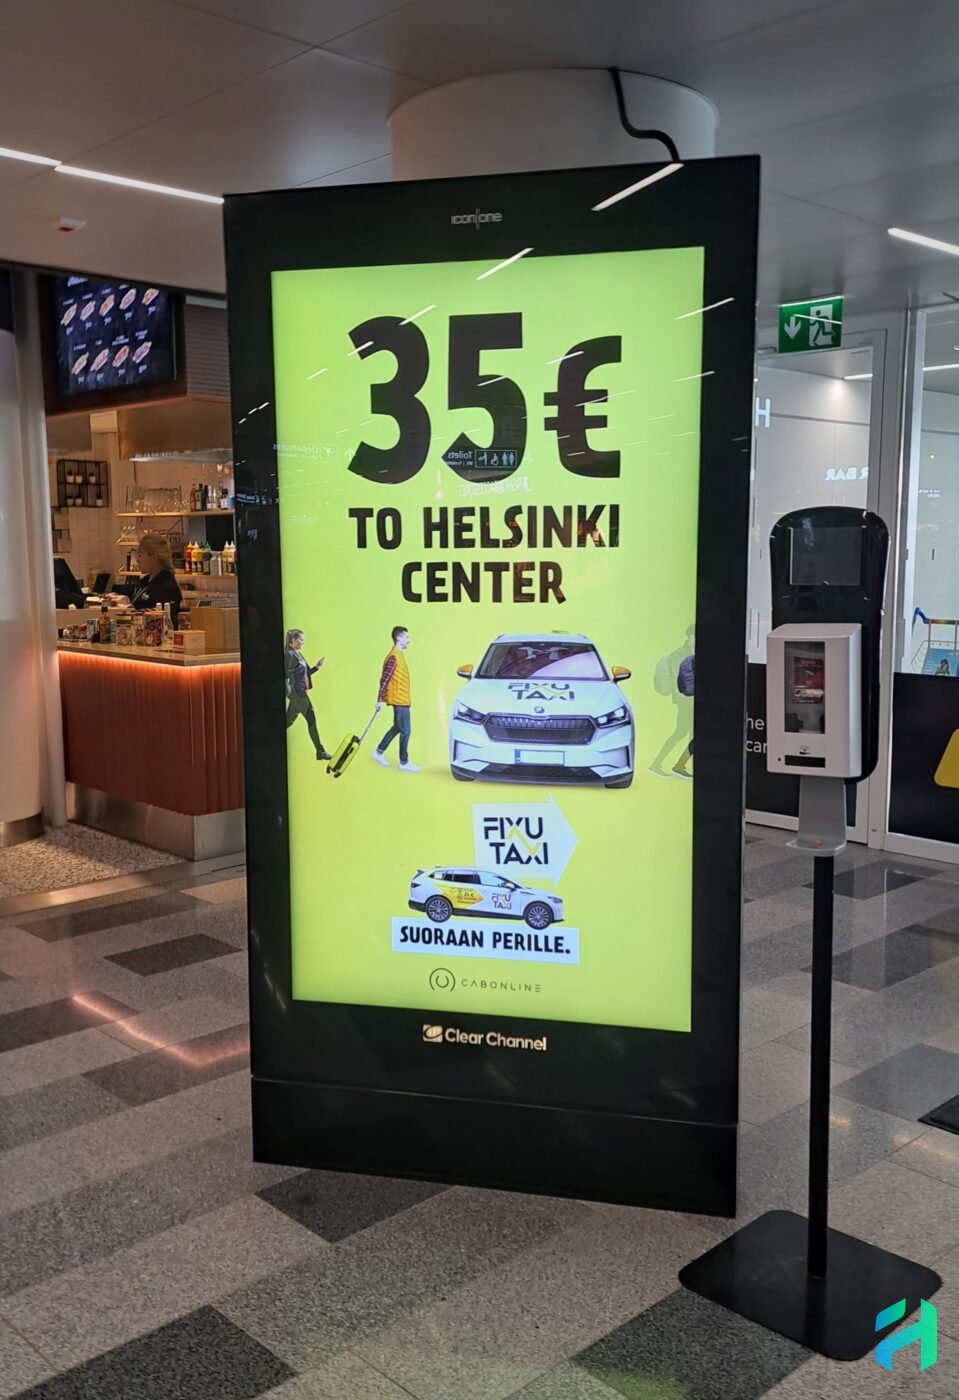 Big taxi advertisement at the airport